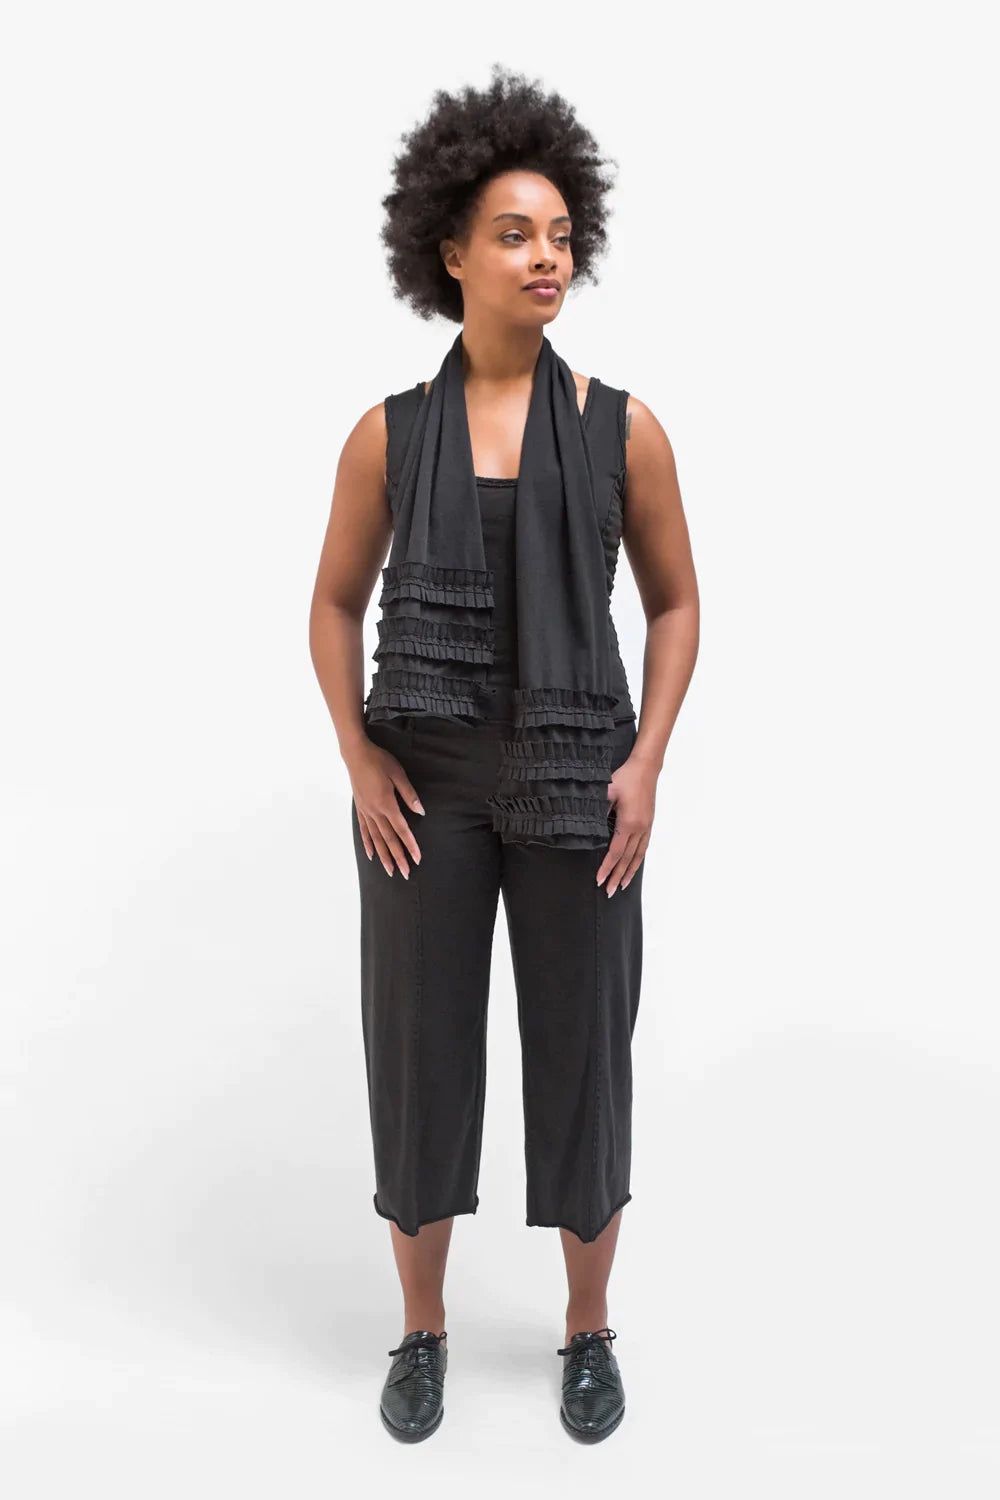 The School of Making model in Crop Pant in black made with 100% organic cotton. 